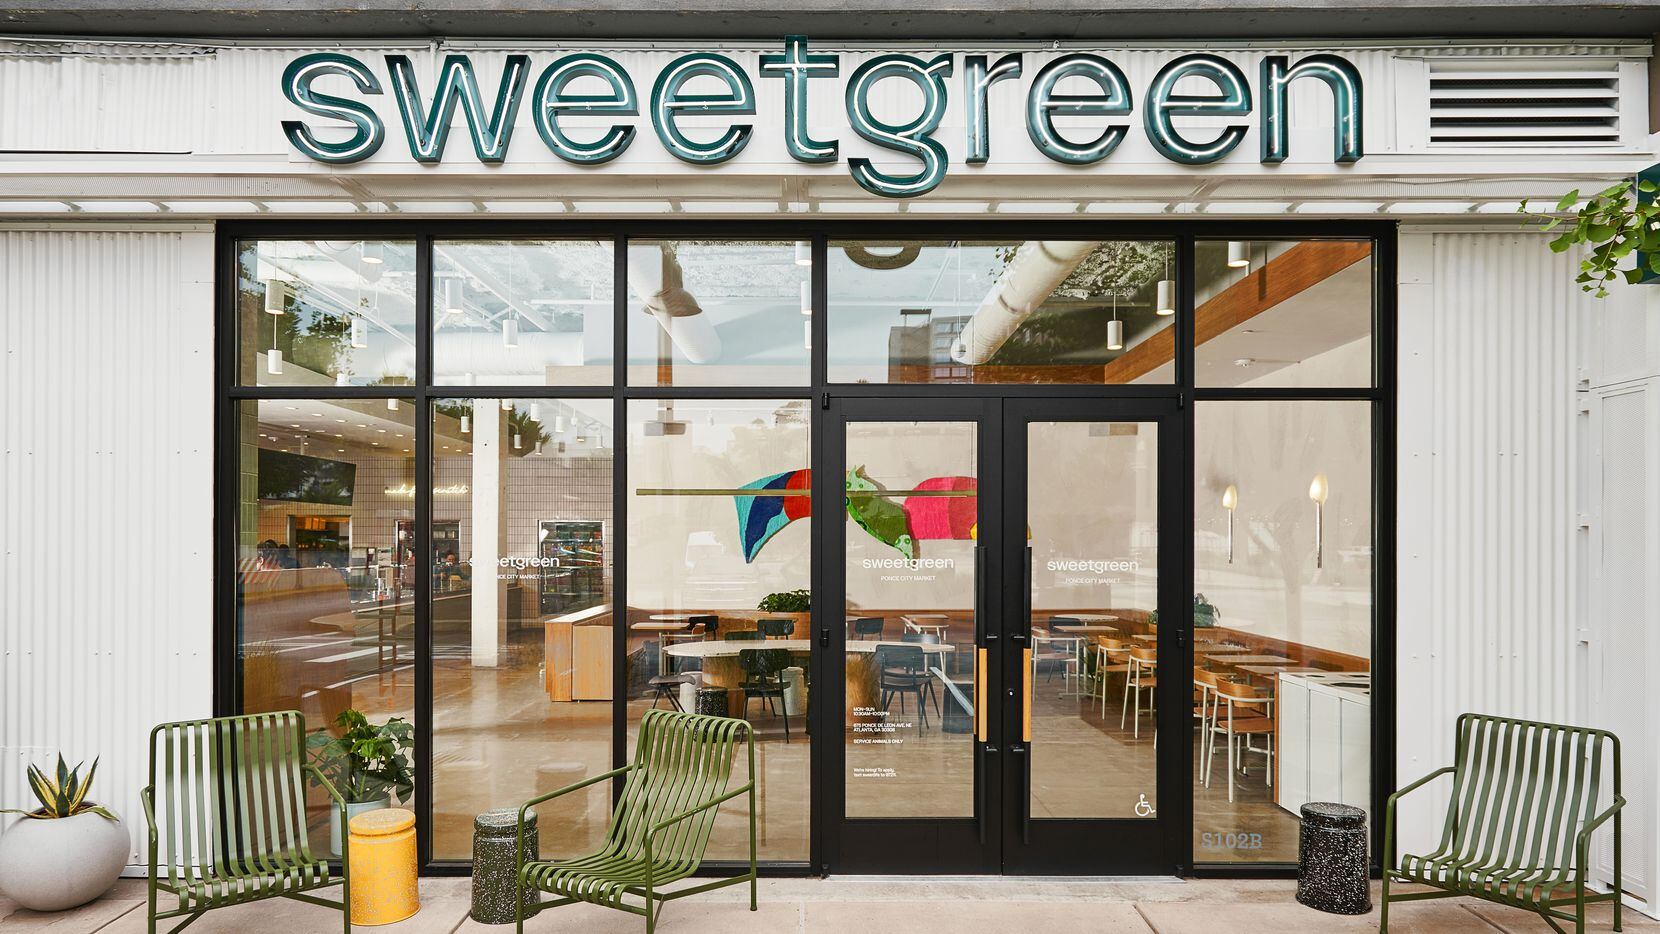 The first Sweetgreen in Dallas opened last November in West Village.